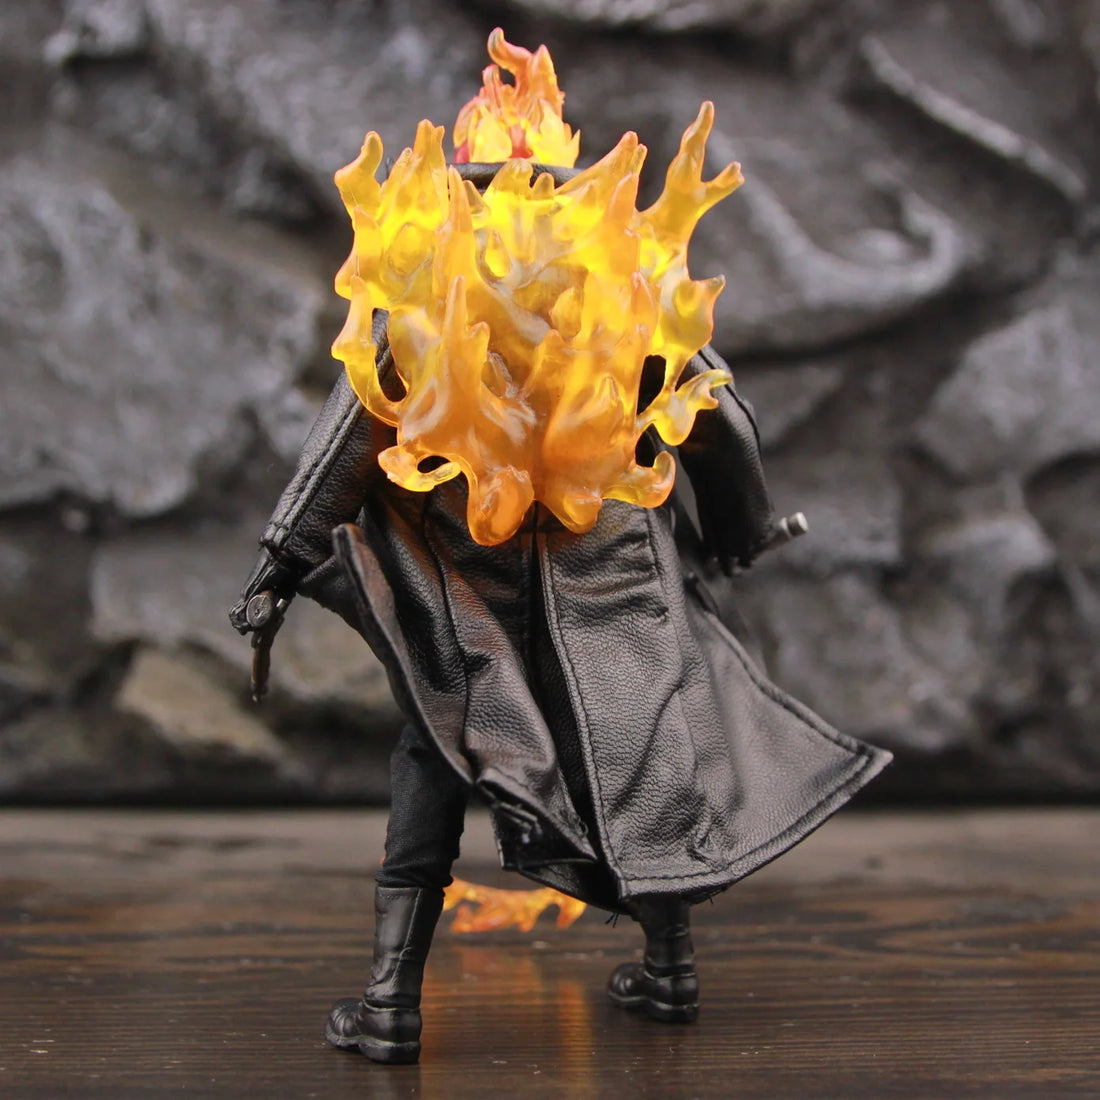 Marvel Ghost Rider 6" Action FIgure Fantastic Four Johnny Blaze Legends one:12 1/12 Clothes Comic Movie Toys Model Doll